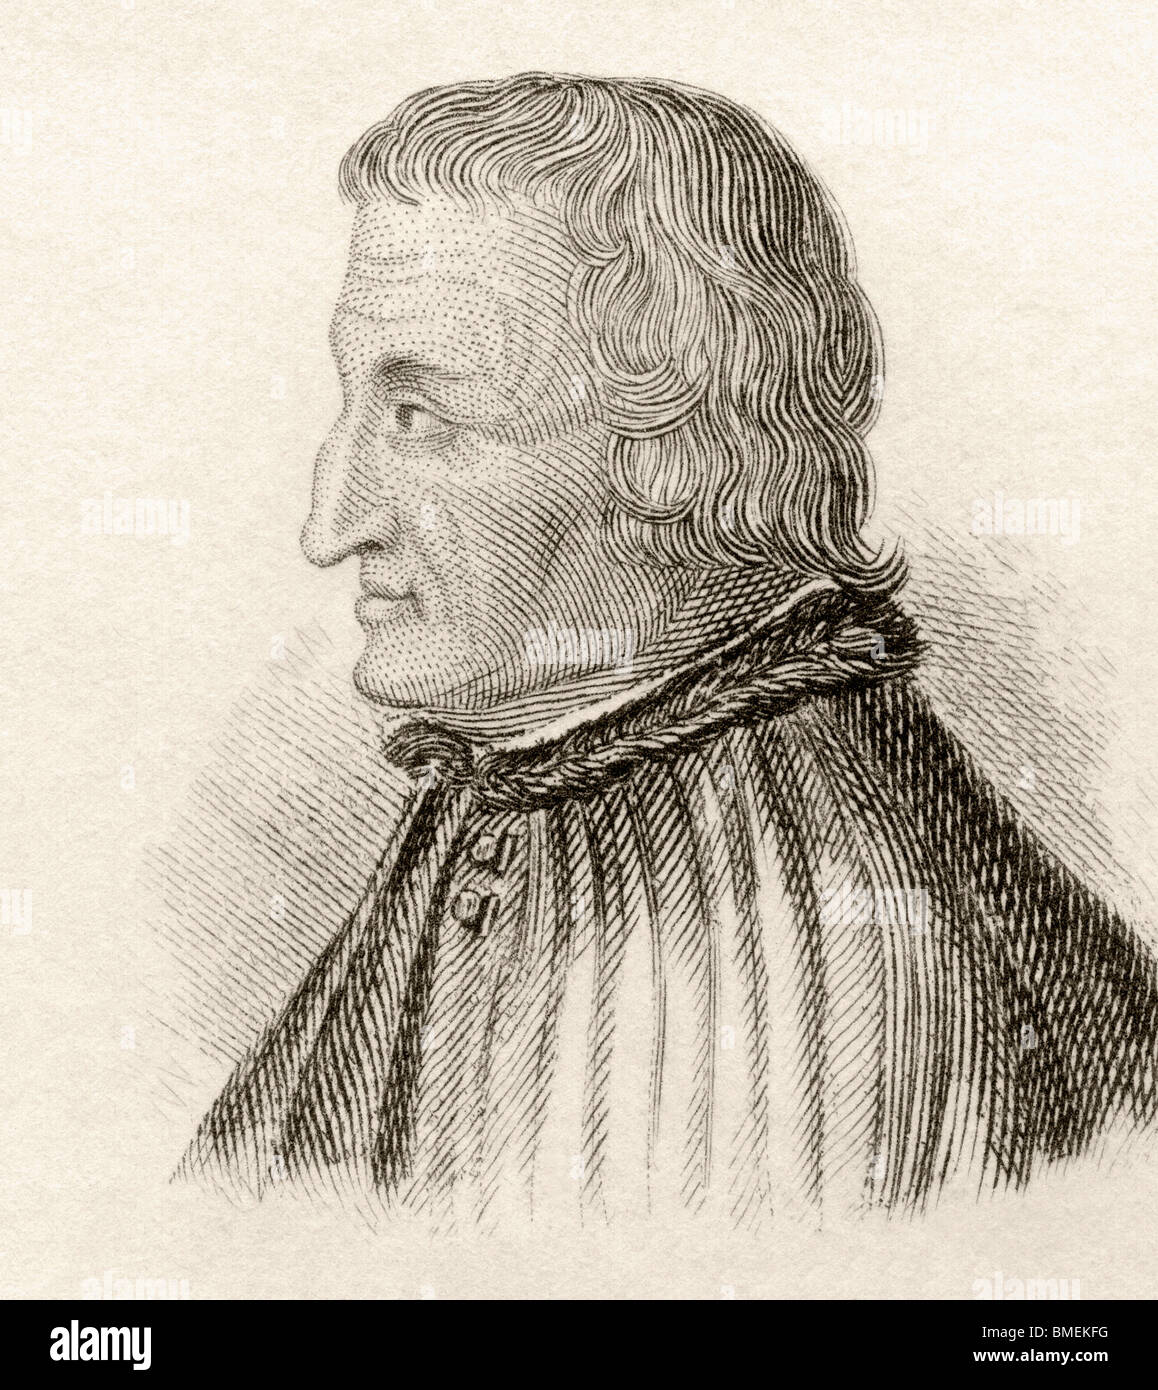 Polydore Vergil, c. 1470 to 1555. Italian historian. From Crabbes Historical Dictionary published 1825. Stock Photo